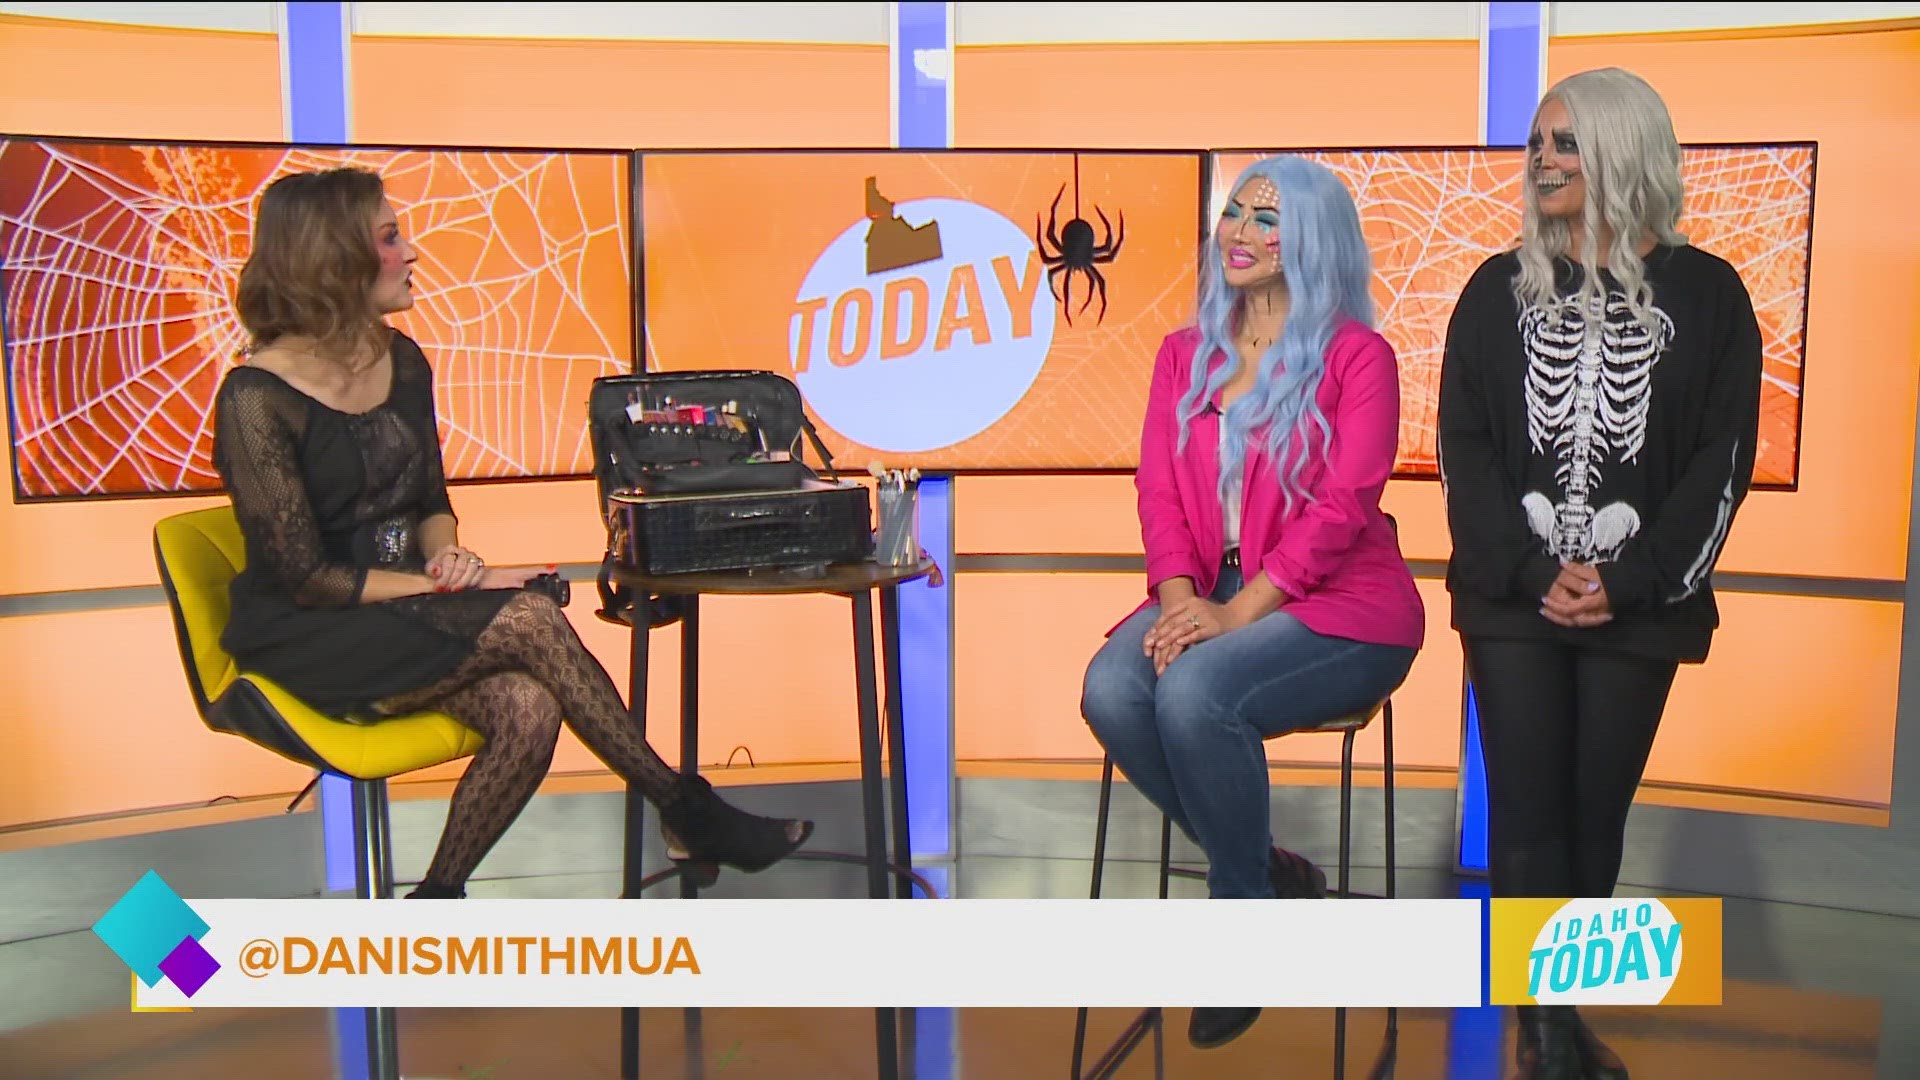 Idaho based Make-up Artist and Influencer, Dani Smith, joined Idaho Today’s Mellisa Paul to give some expert tips.